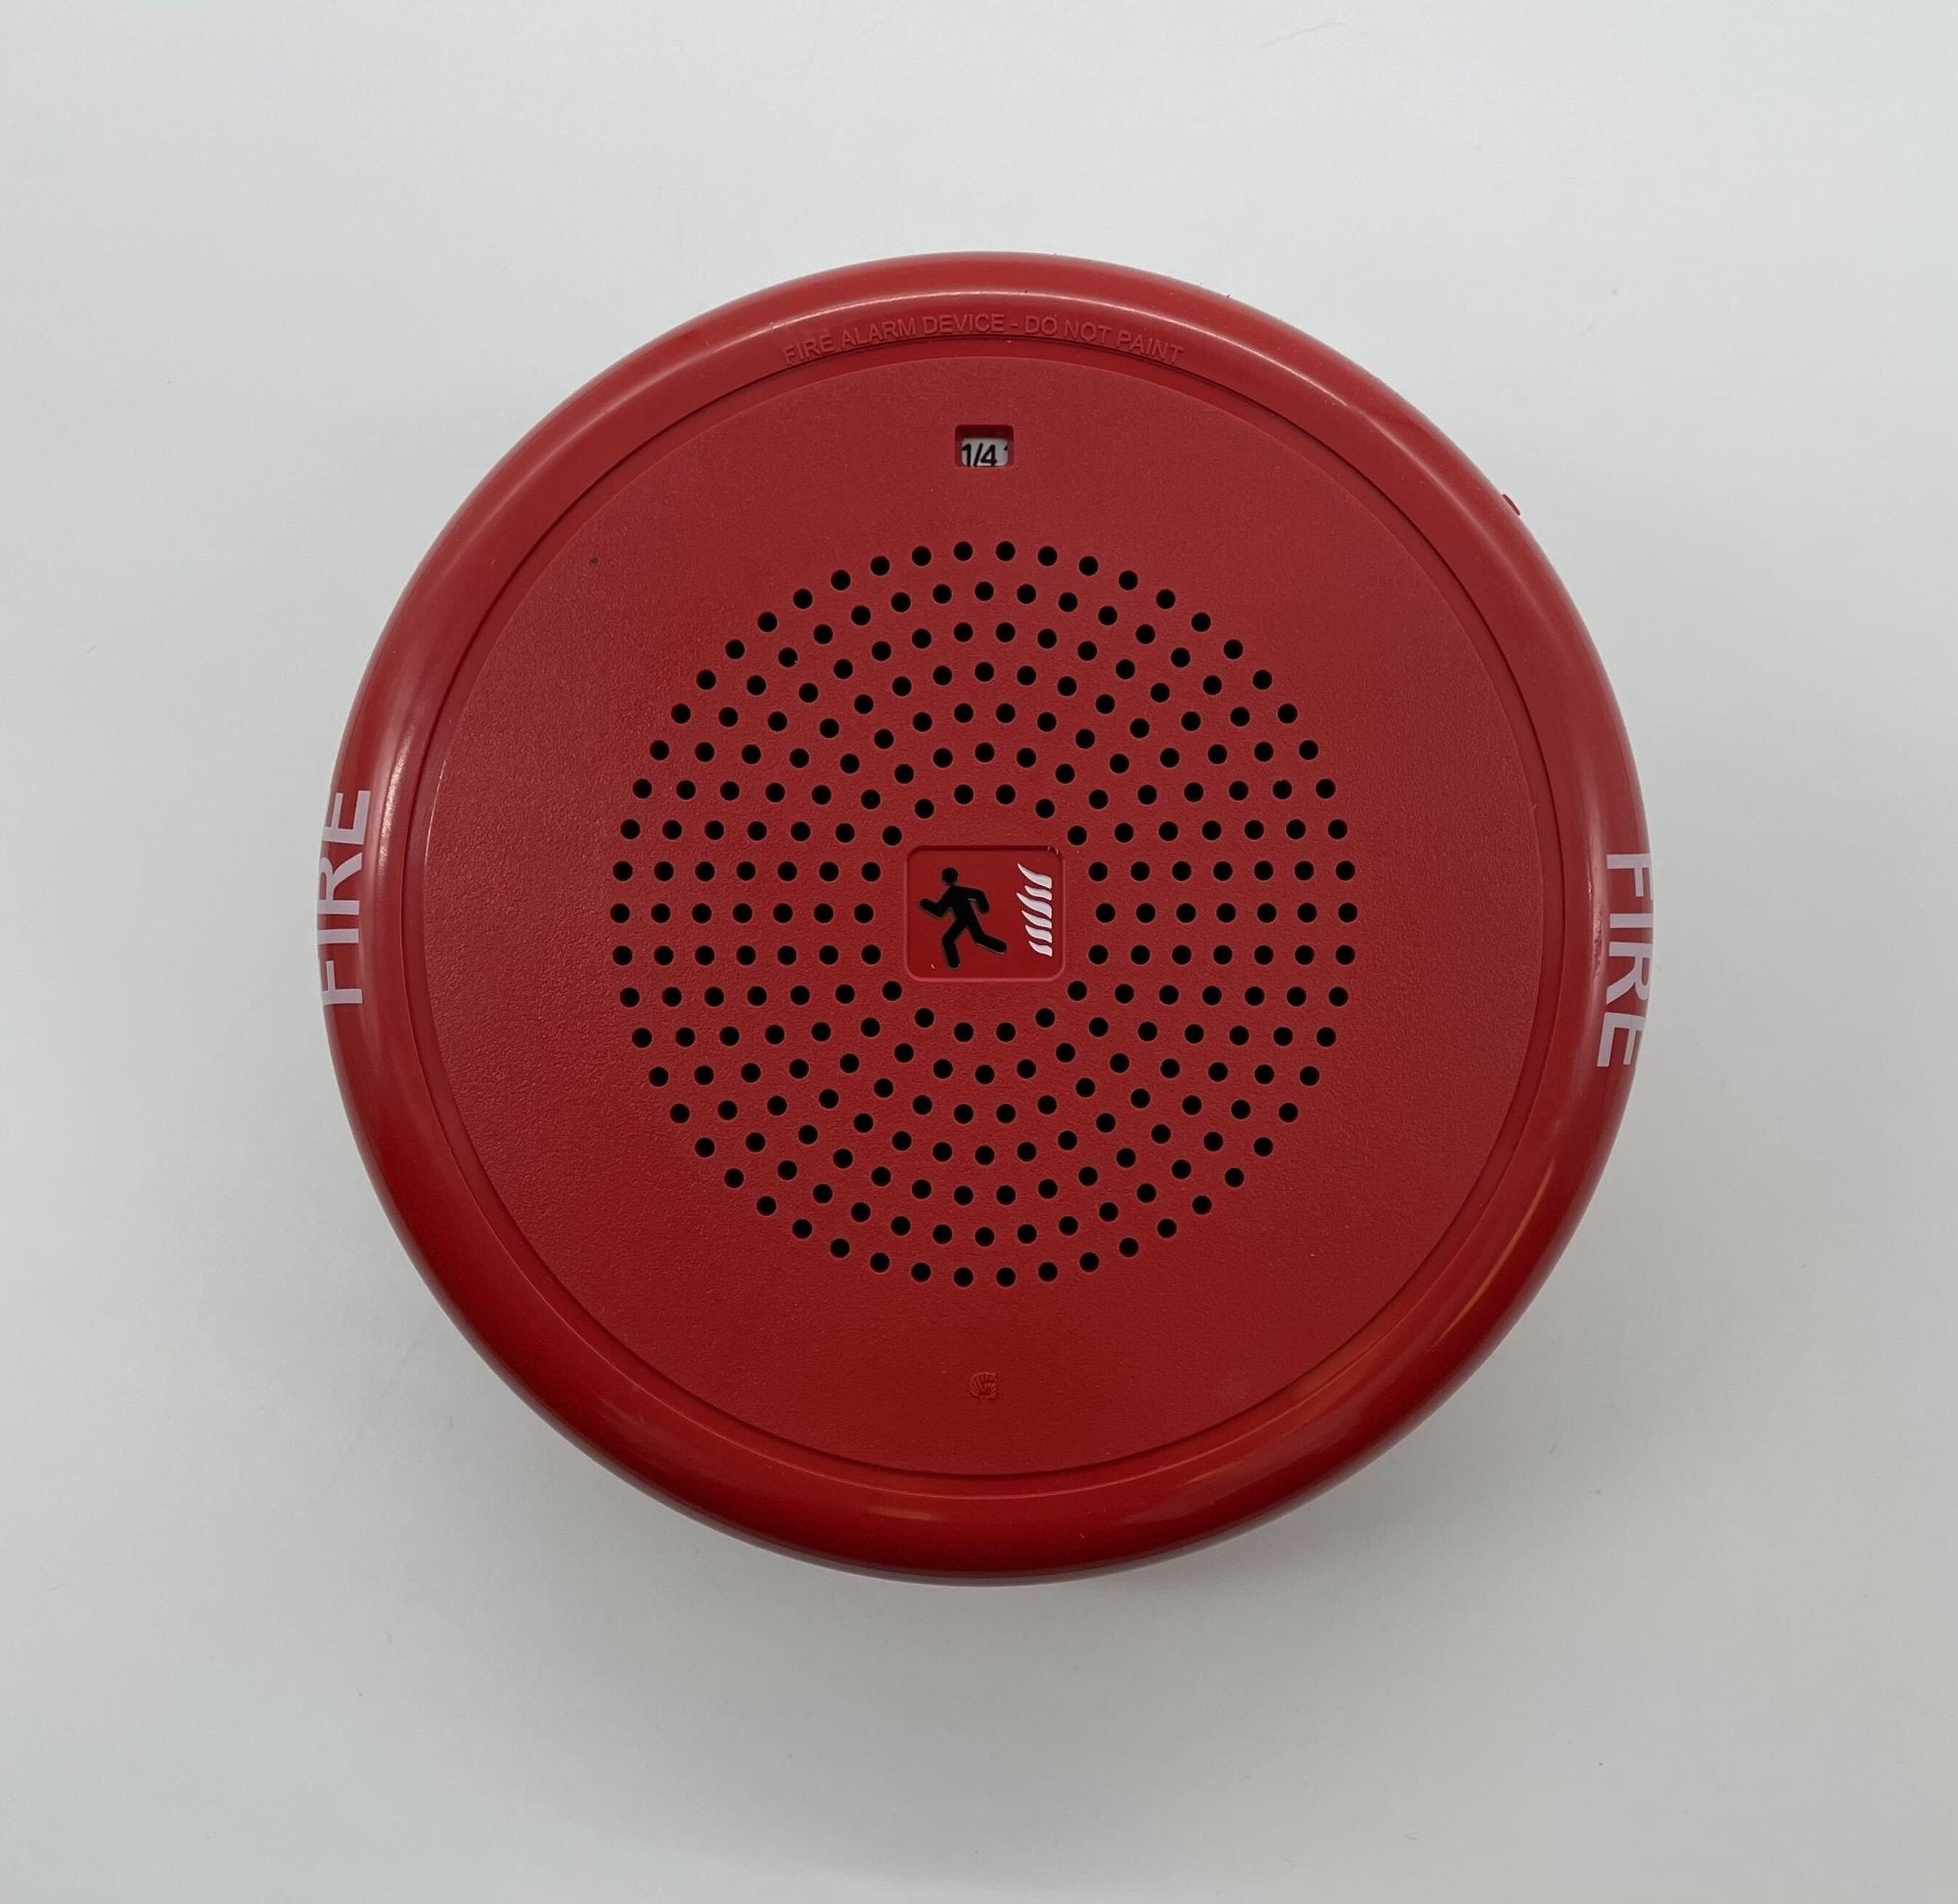 Edwards GCHFRF-S2 - The Fire Alarm Supplier